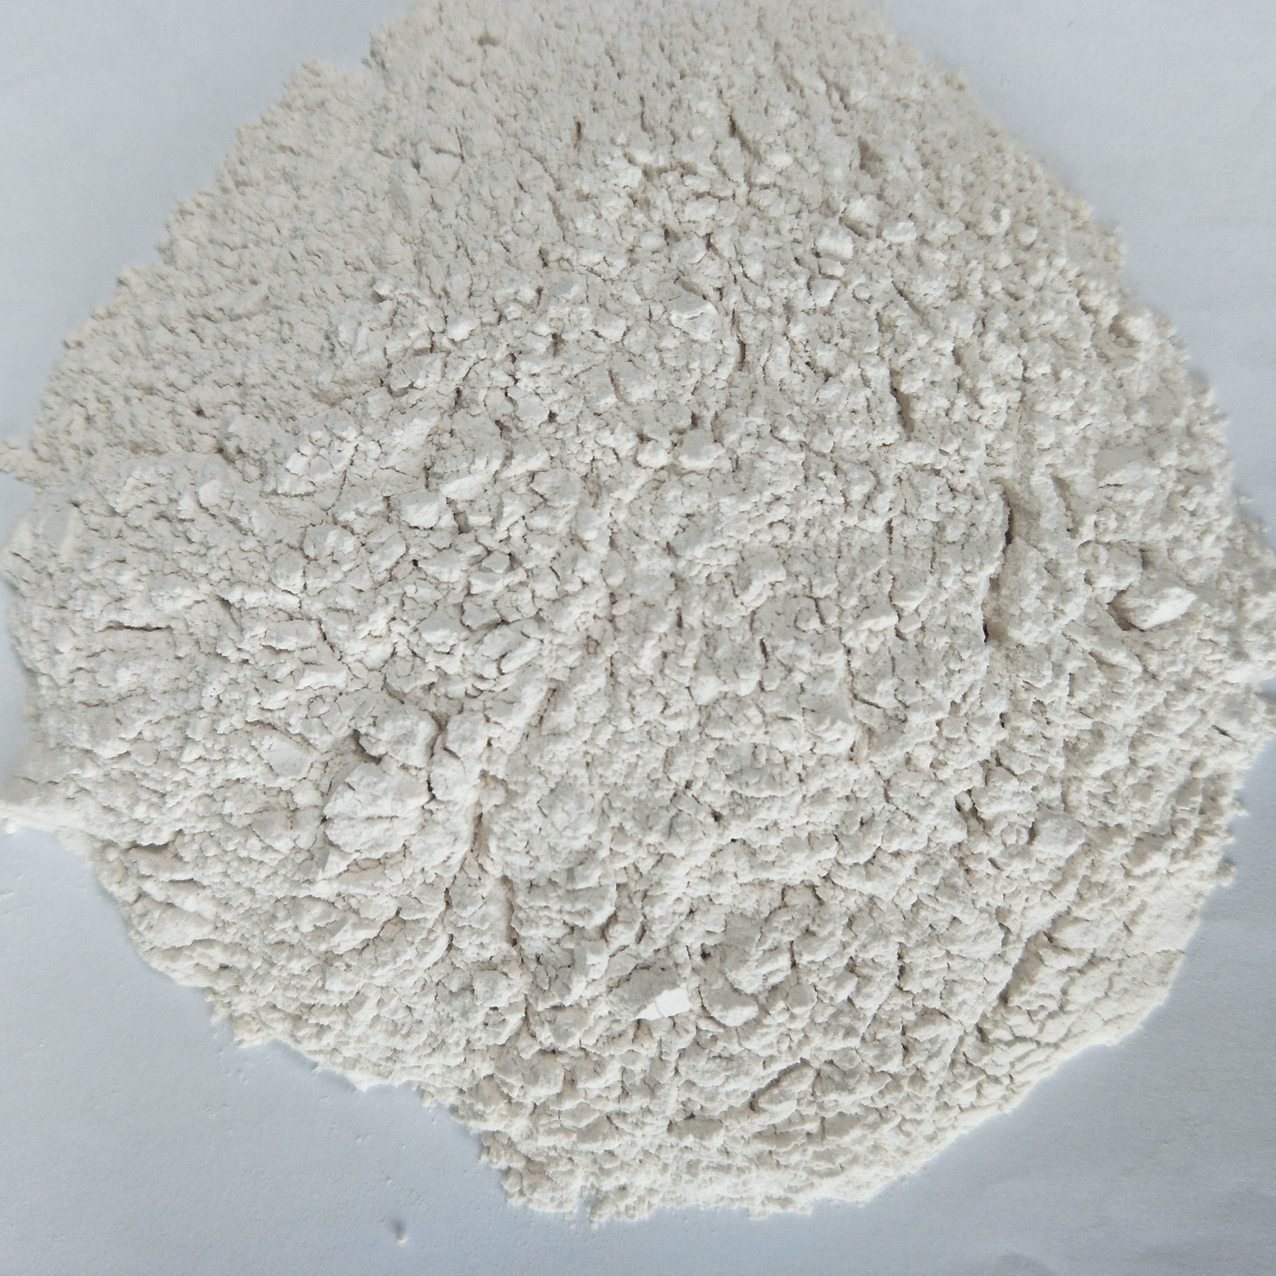 Foundry bentonite - an essential material for high-quality castings